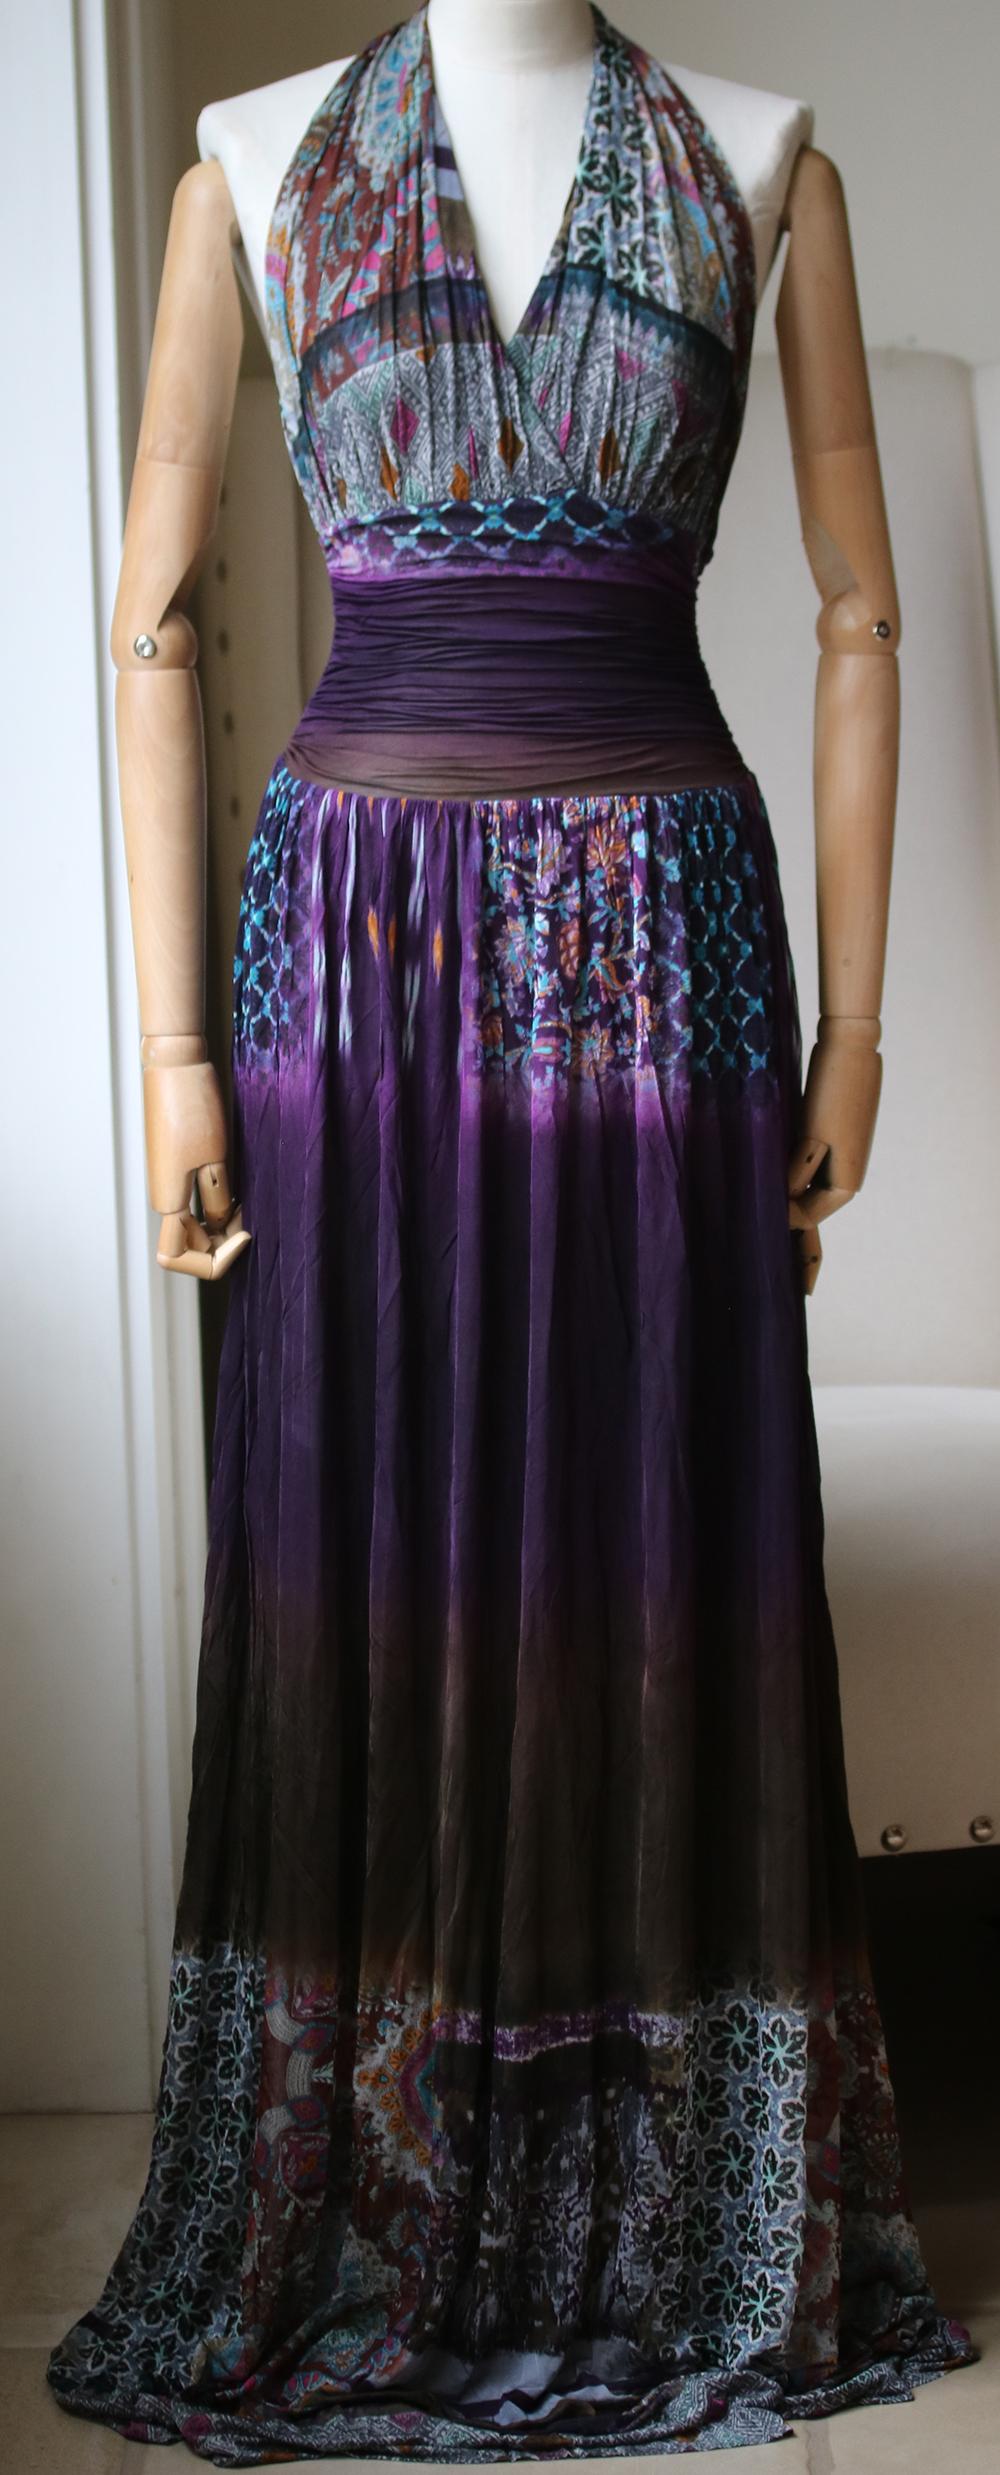 Etro draws on their traditional Italian roots when designing their collections - from shaping to prints, the bohemian-inspired brand continues to create retro-influenced pieces with a modern twist. This purple halter printed maxi dress from Etro